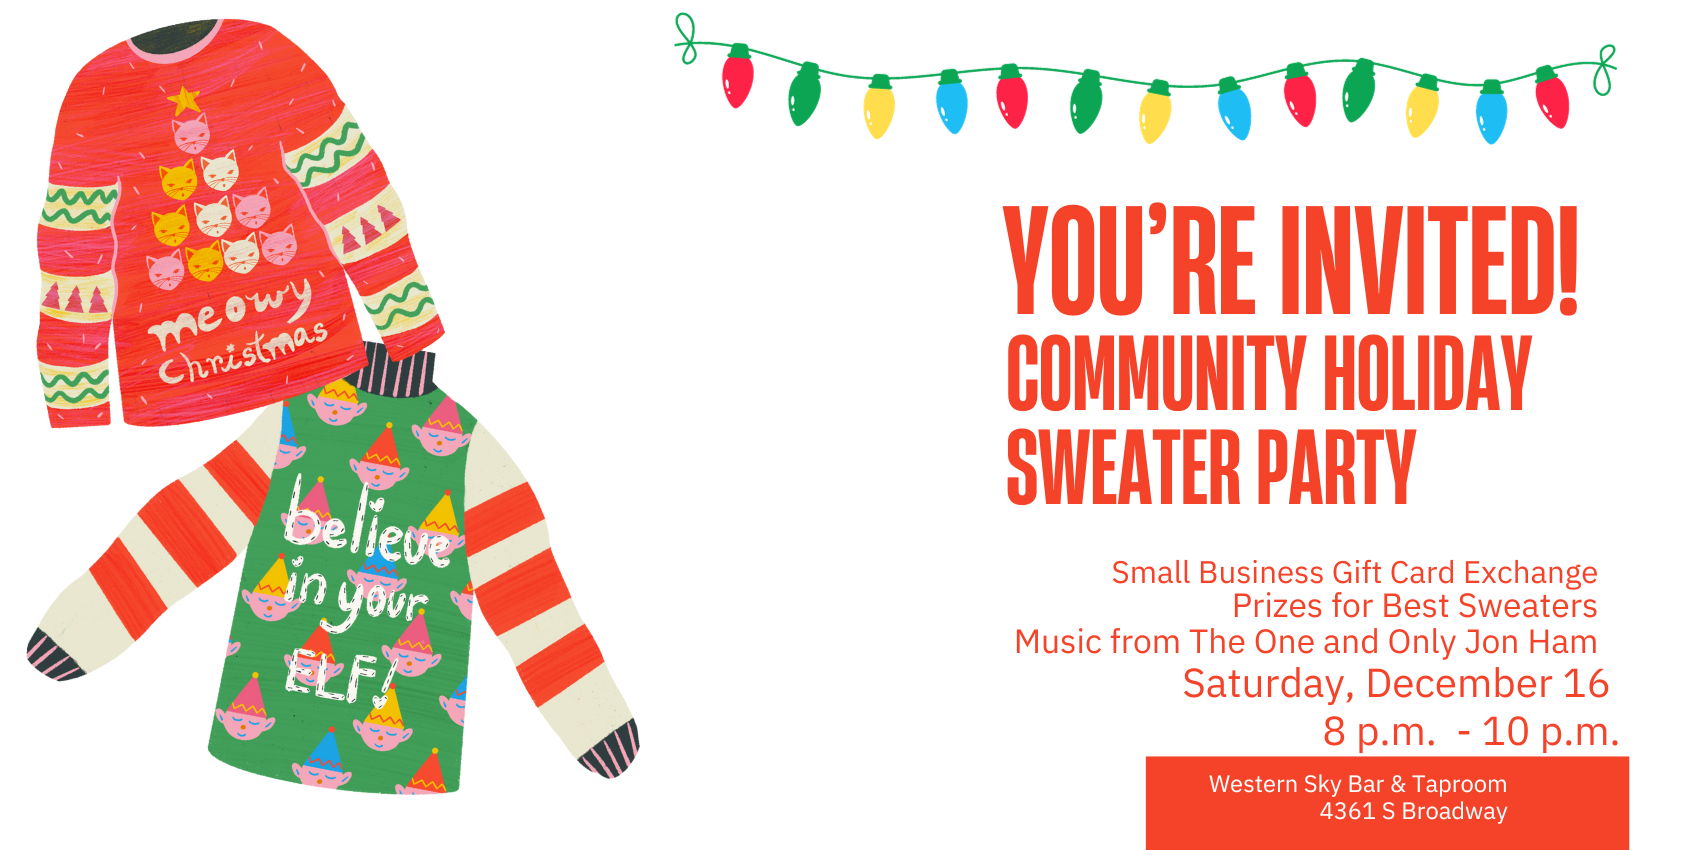 Community Holiday Sweater Party at Western Sky Bar & Taproom promotional image